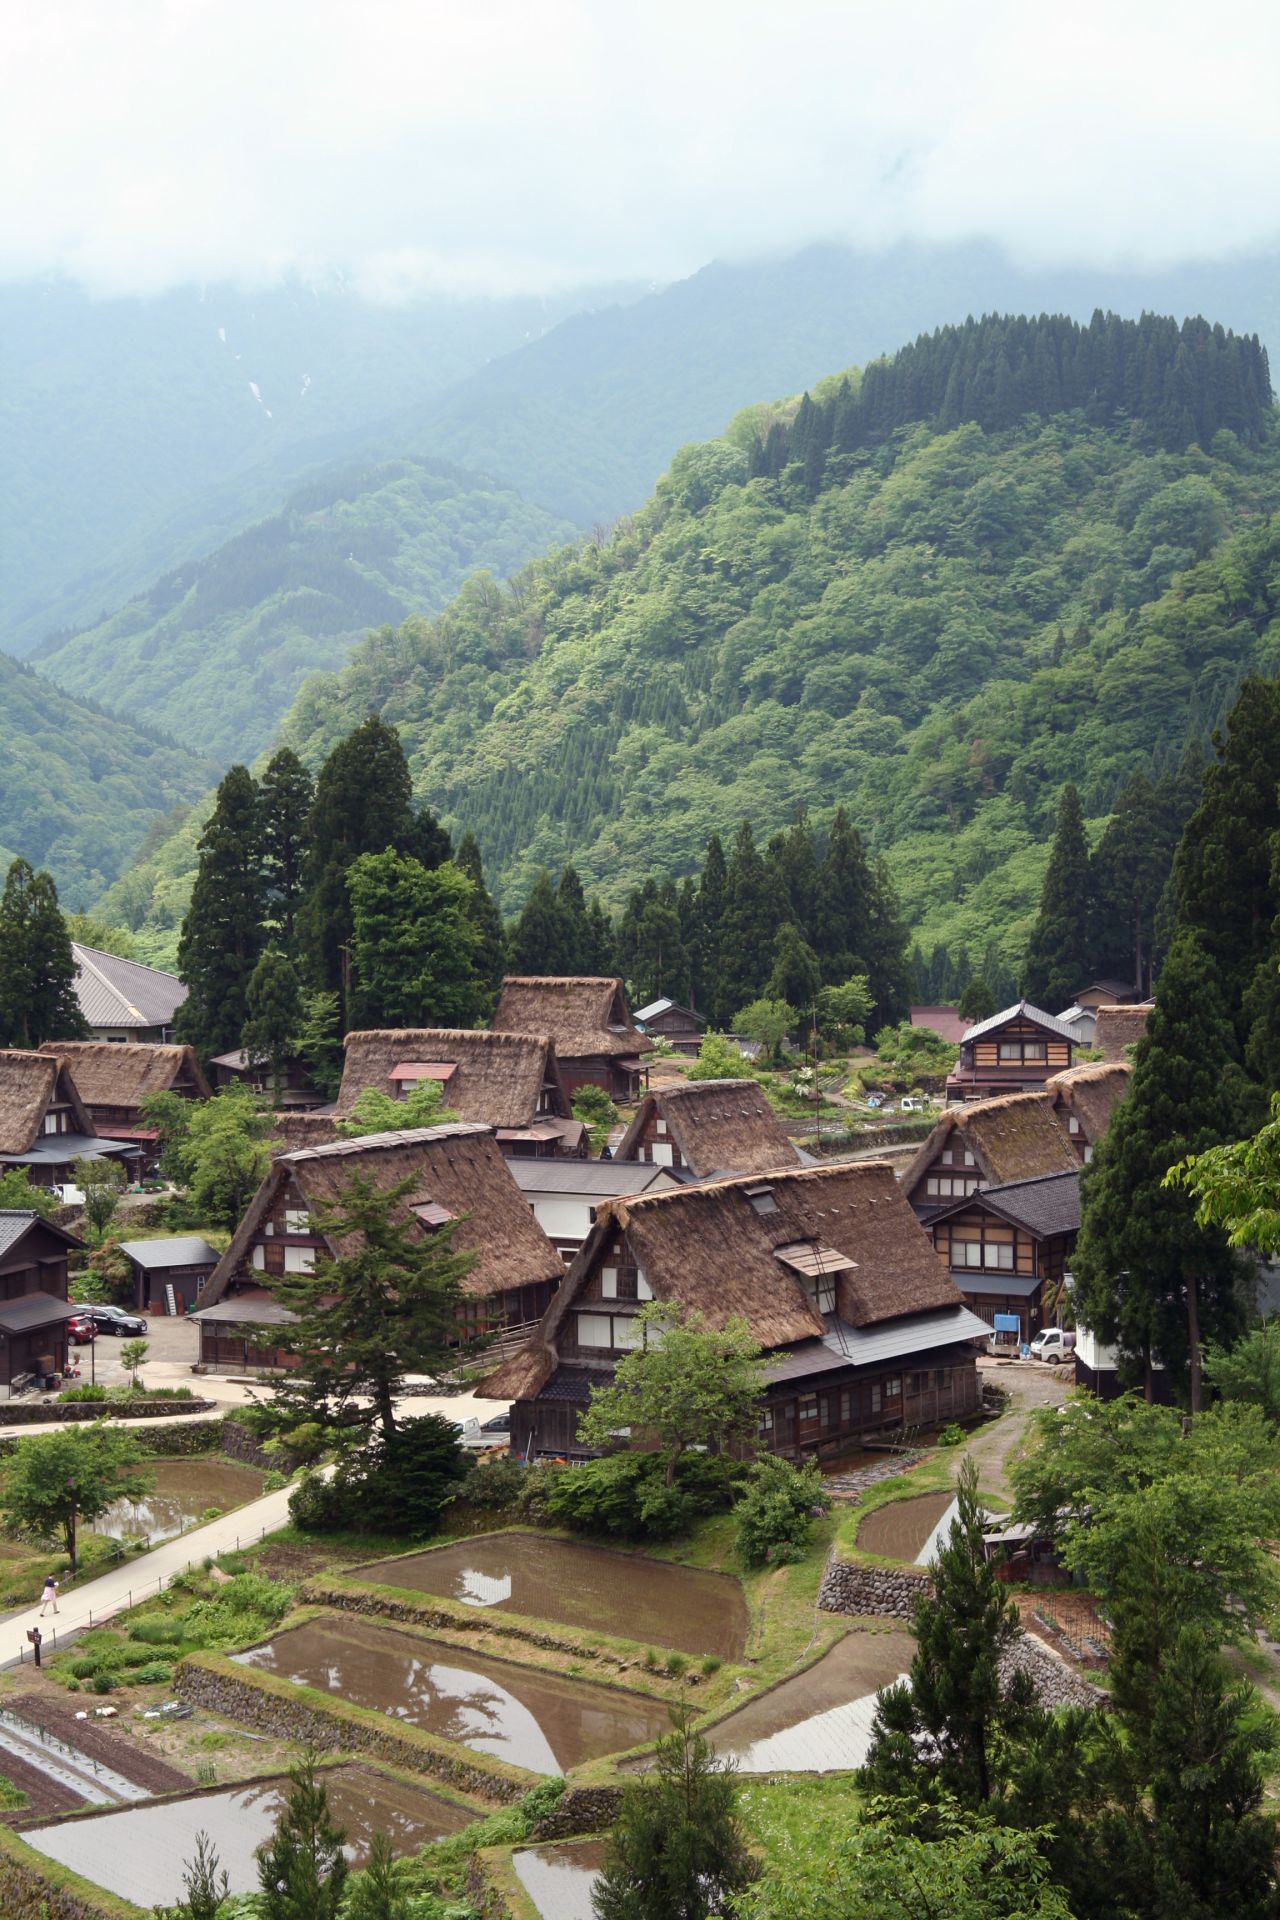 Japan's minka houses feature steep thatched roofs and projecting eaves. Found throughout the country, the exact style of minka buildings depends on the local climate and the status of their owner.